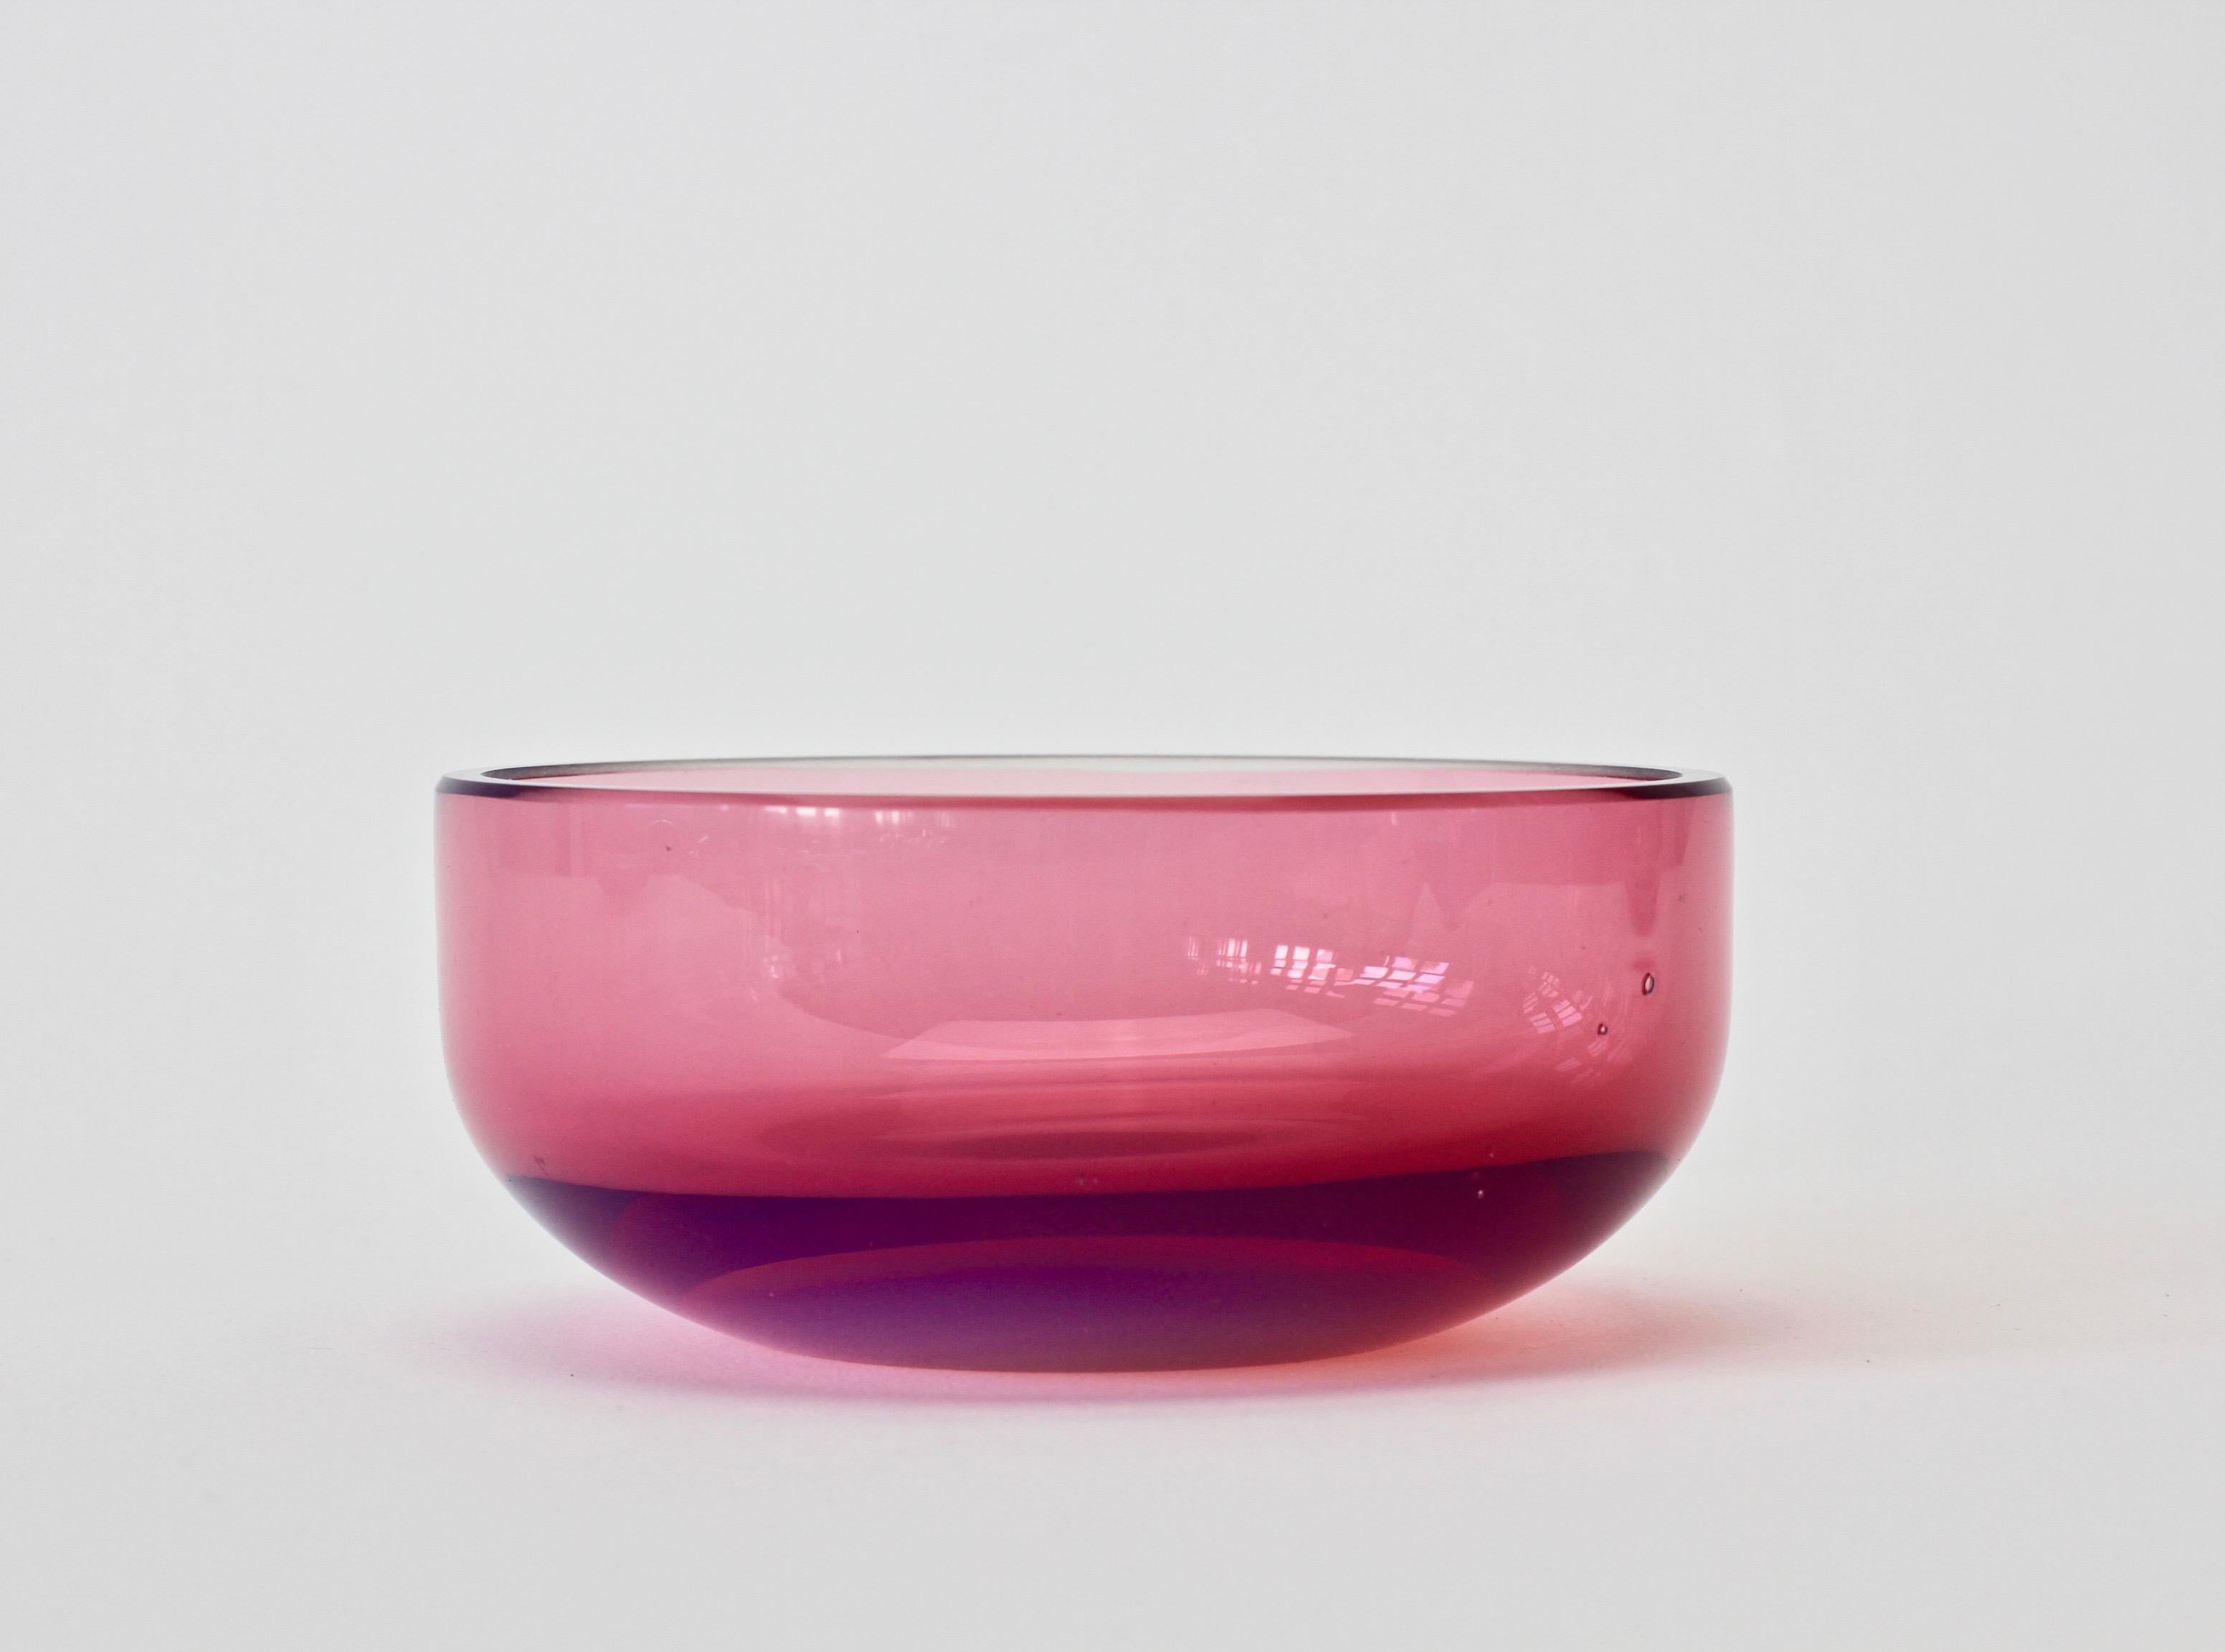 Single midcentury, vintage 'Opalino' Murano glass bowl designed by Antonio da Ros (1936-2012) for Cenedese, circa 1970-1990. Wonderful translucent color of vivid pink with a secondary layer of purple/lilac glass. Simplistic yet elegant form - almost